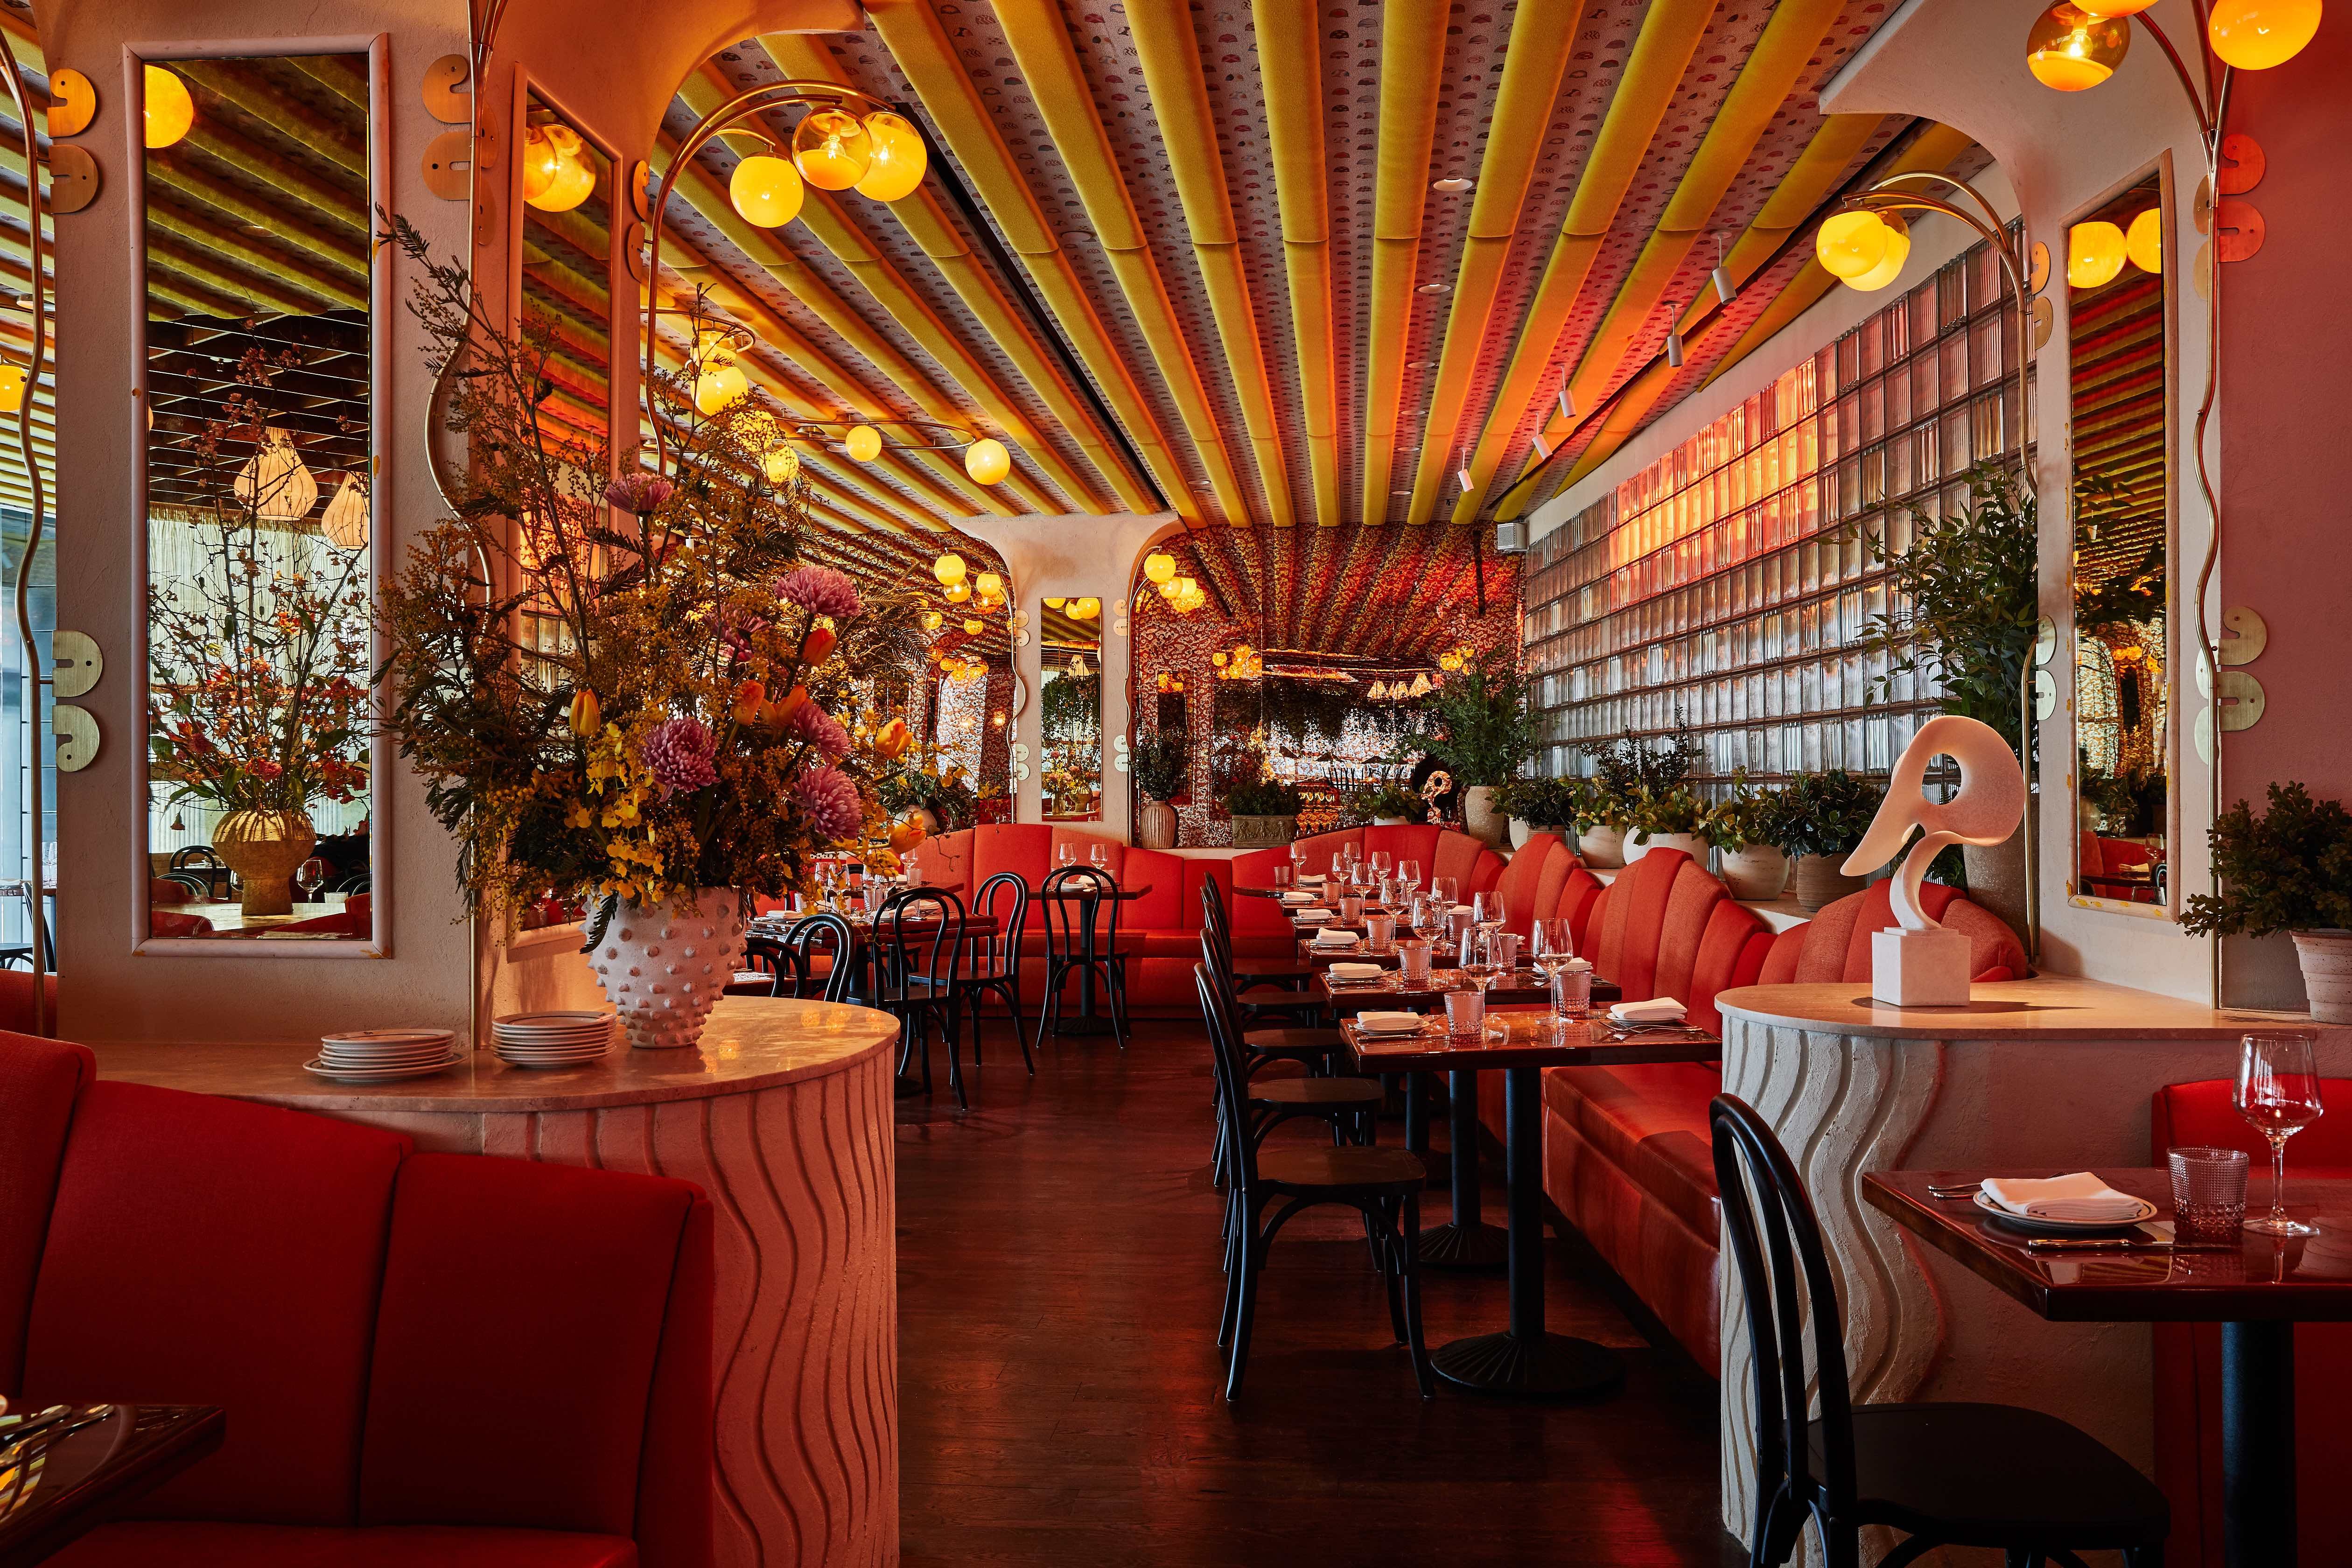 40+ of the Best Restaurants for Birthday Dinners in NYC